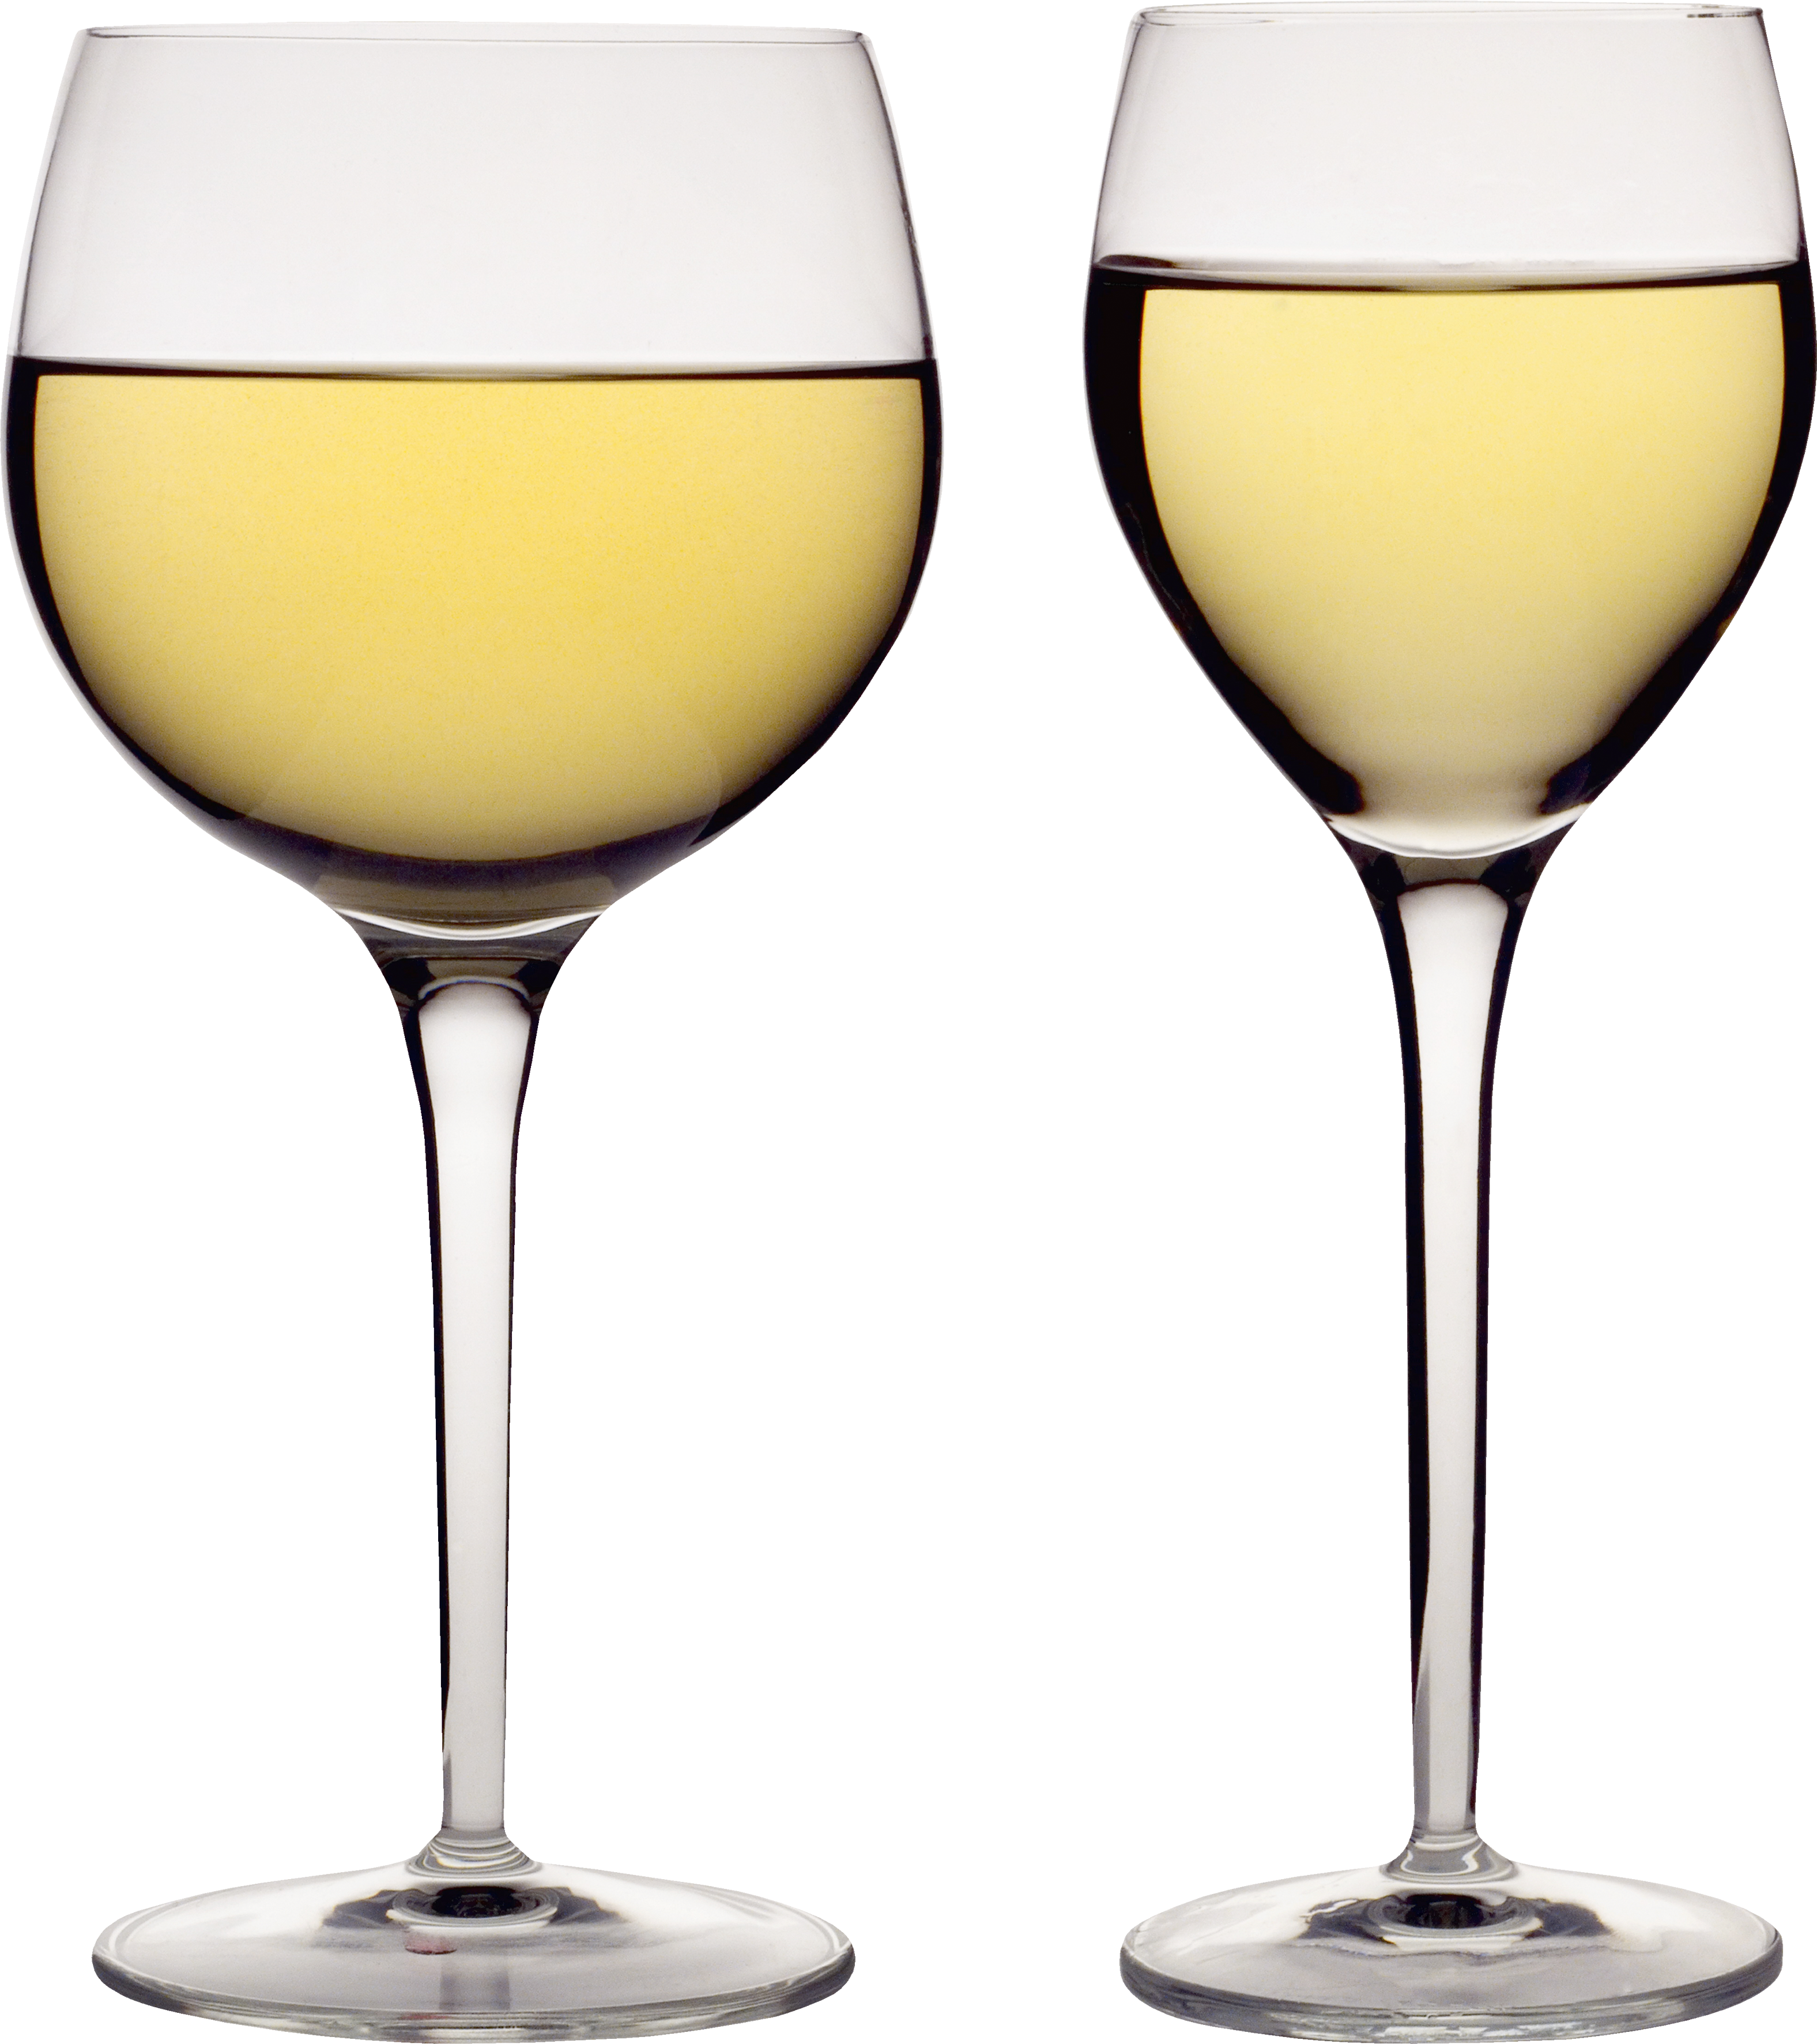 Empty wine glass PNG image